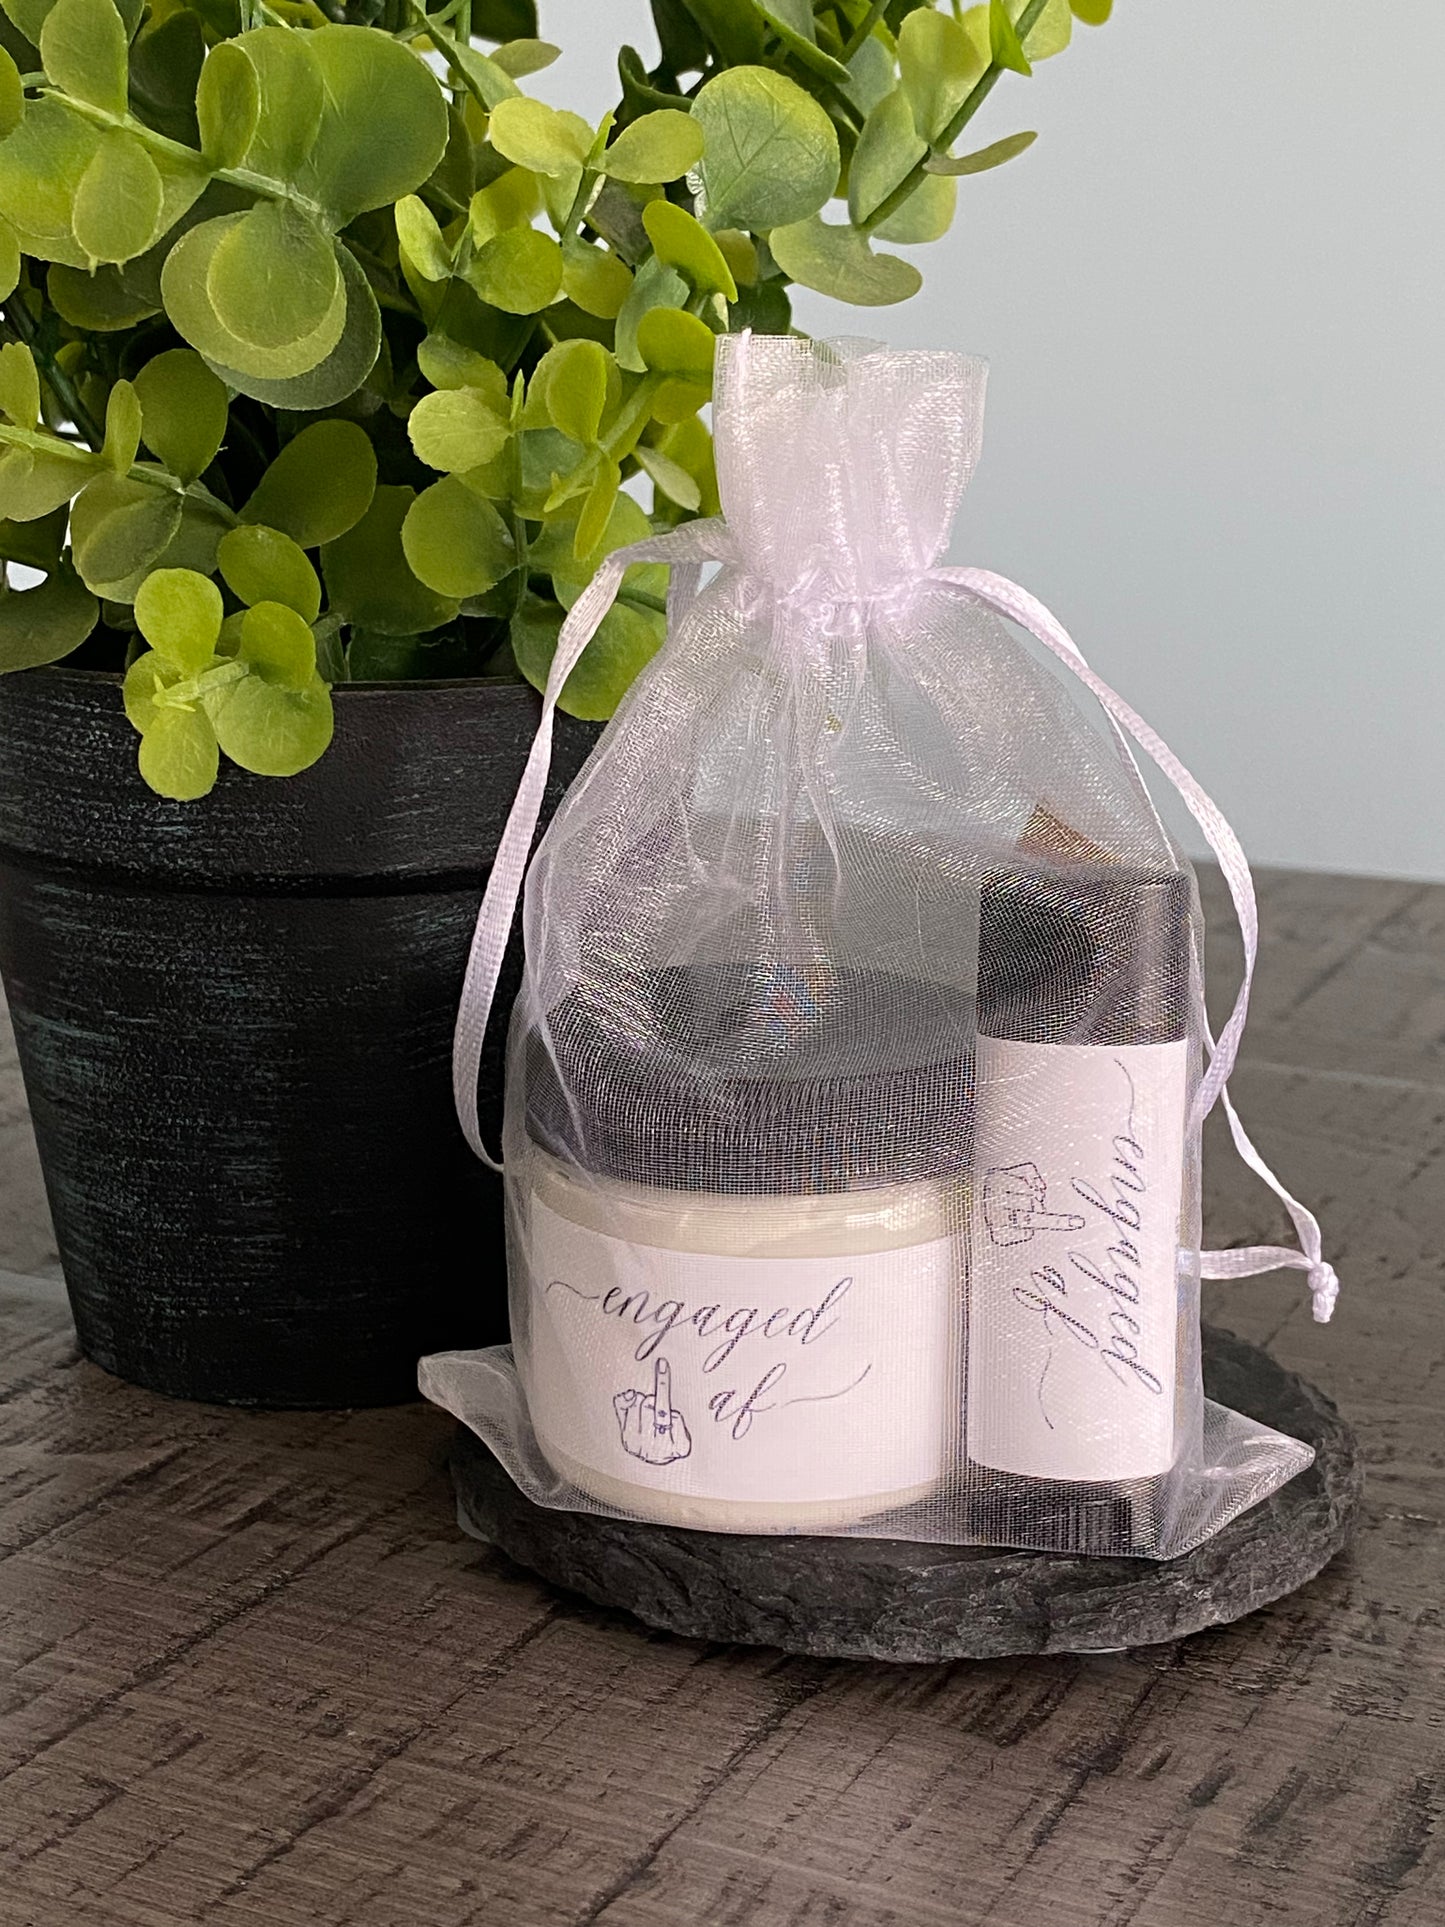 Special Event Gift Sets